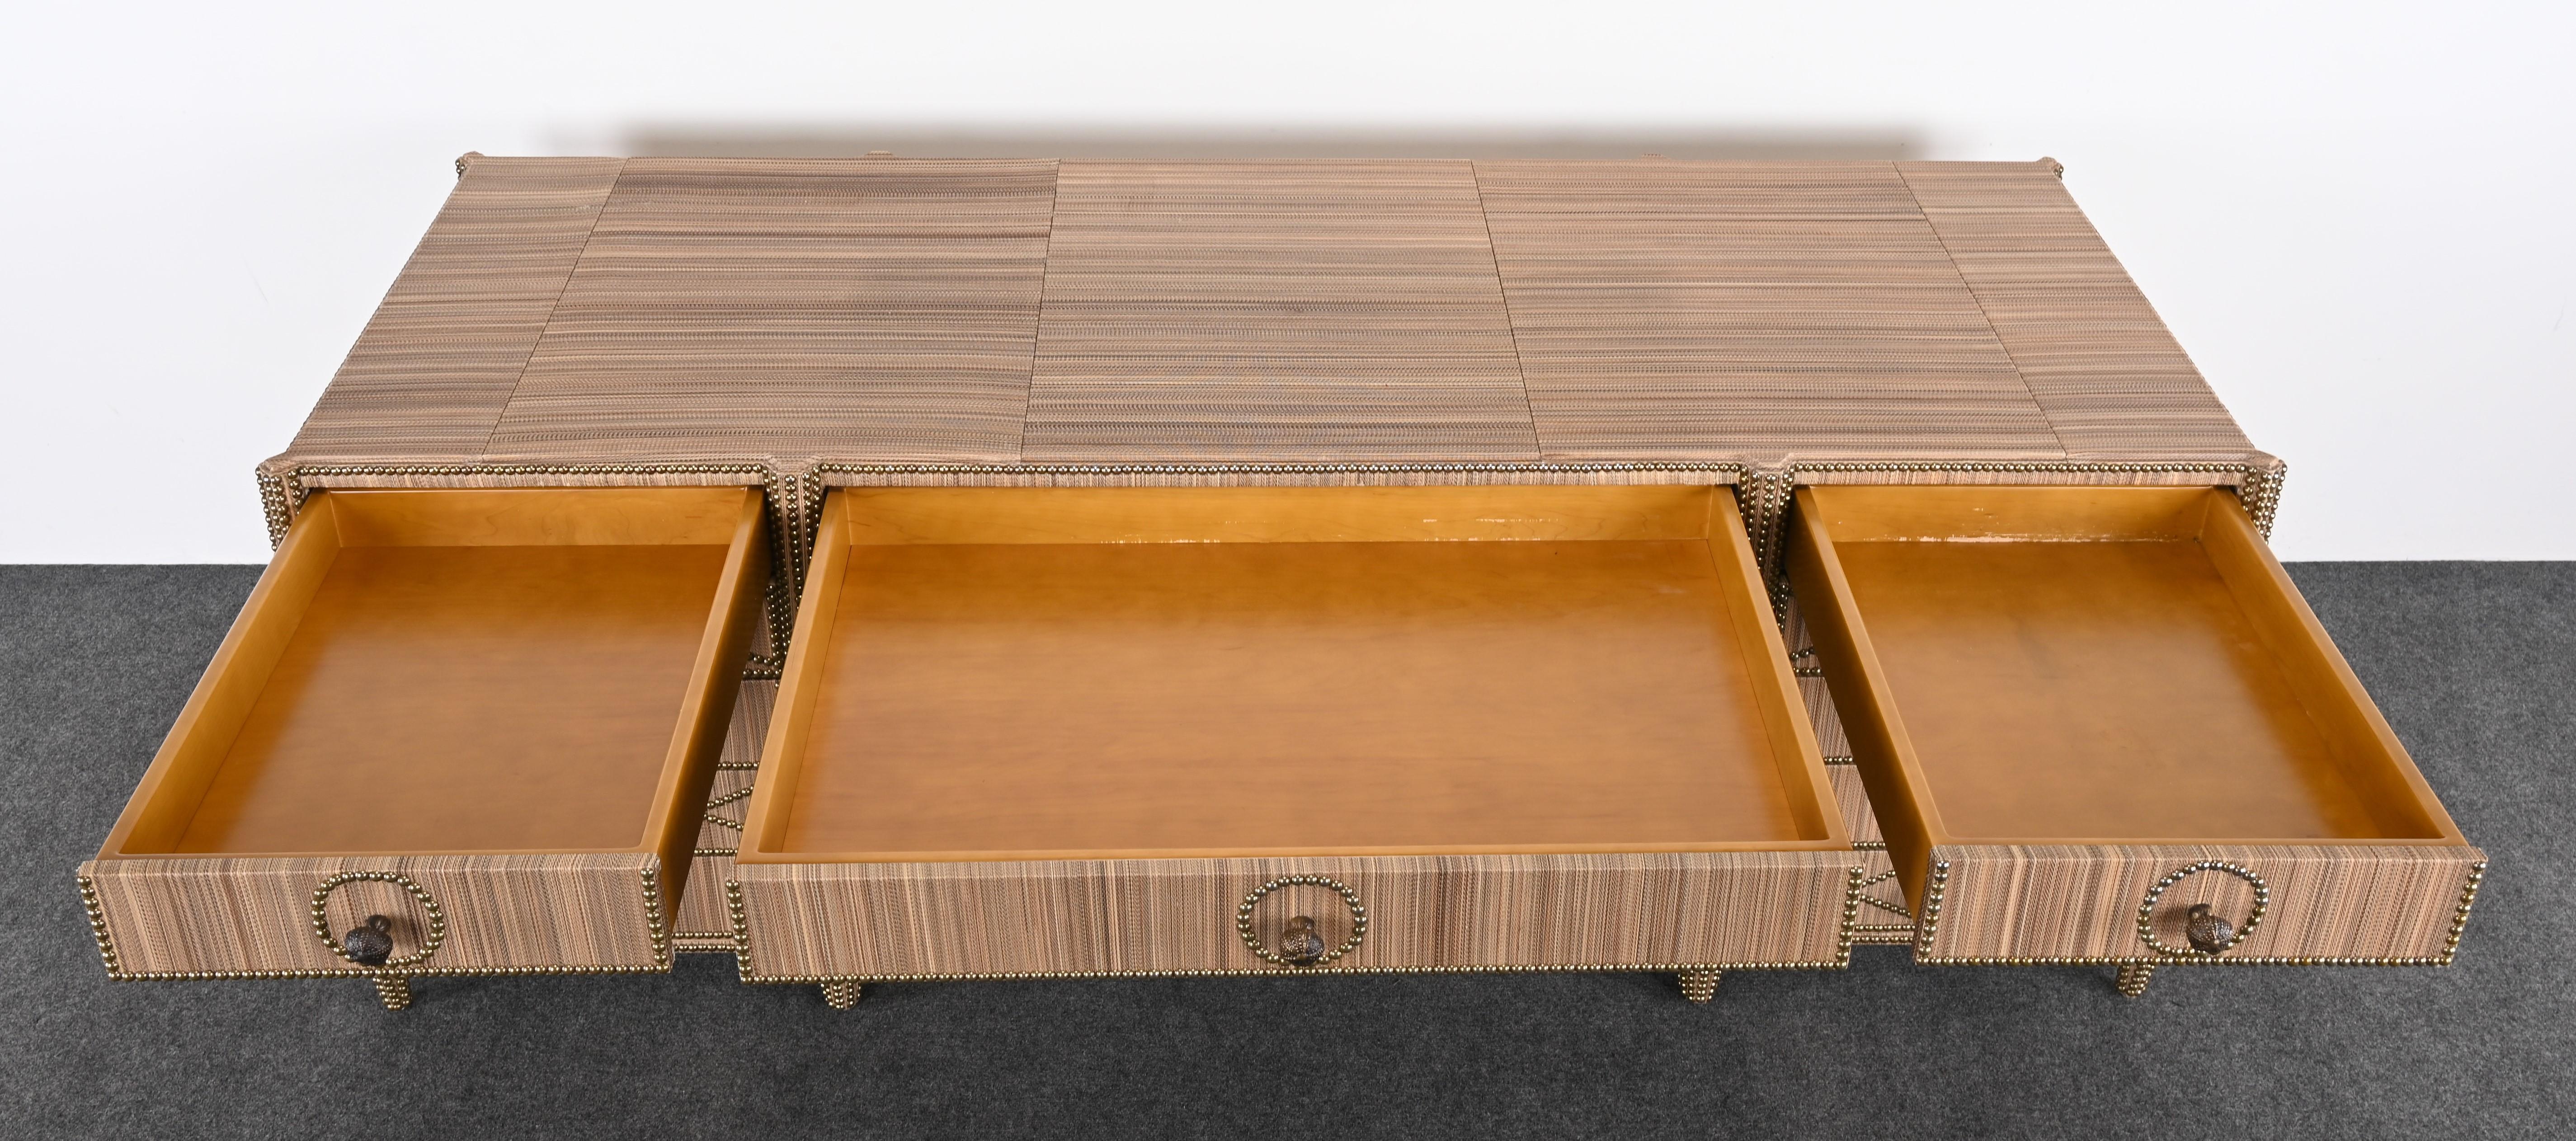 Monumental Custom Horsehair Desk by Peter Marino, 20th Century USA For Sale 3